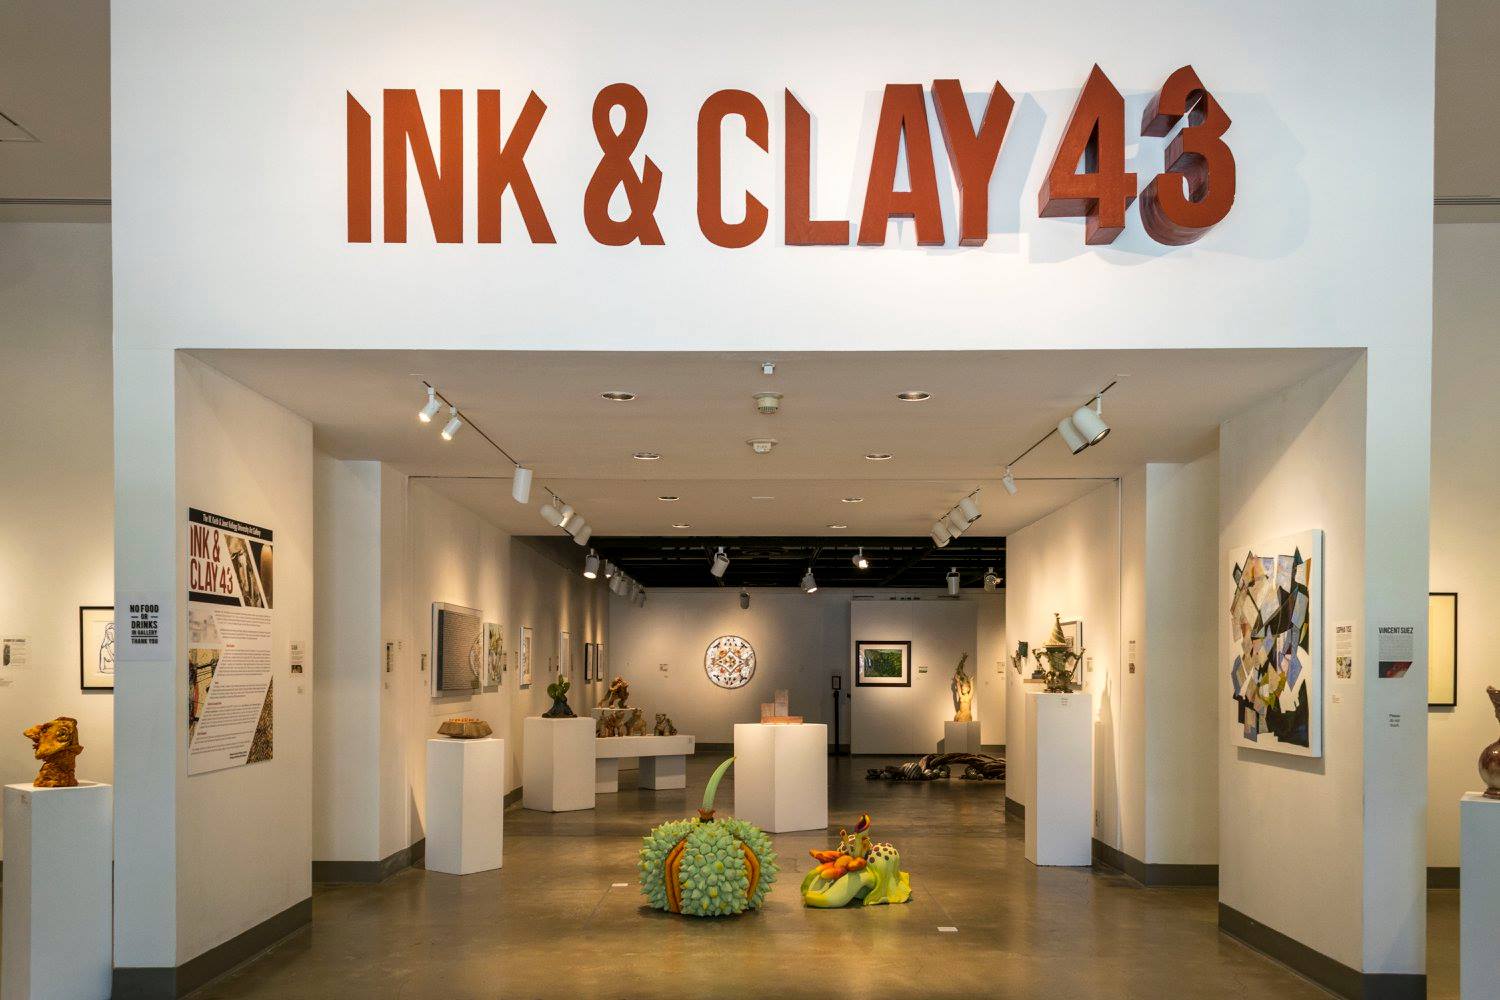 Installation View, Title Wall Exhibition Entrance, Exhibition: "Ink & Clay 44", Sept. 16, 2017 to Oct. 26, 2017